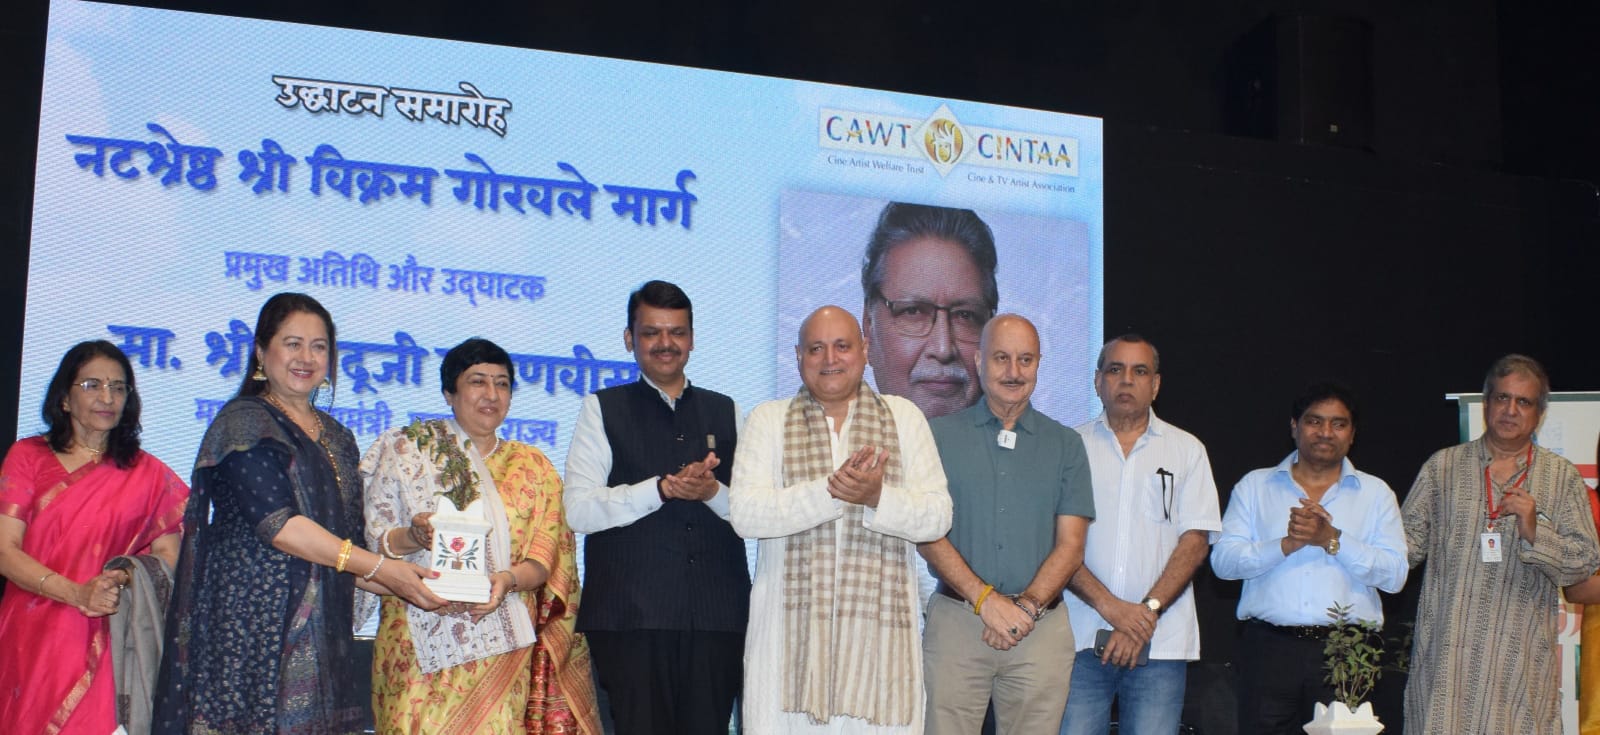 Road leading to CINTAA Tower named after Vikram Gokhle, Devendra Fadnavis inaugurated the plaque!